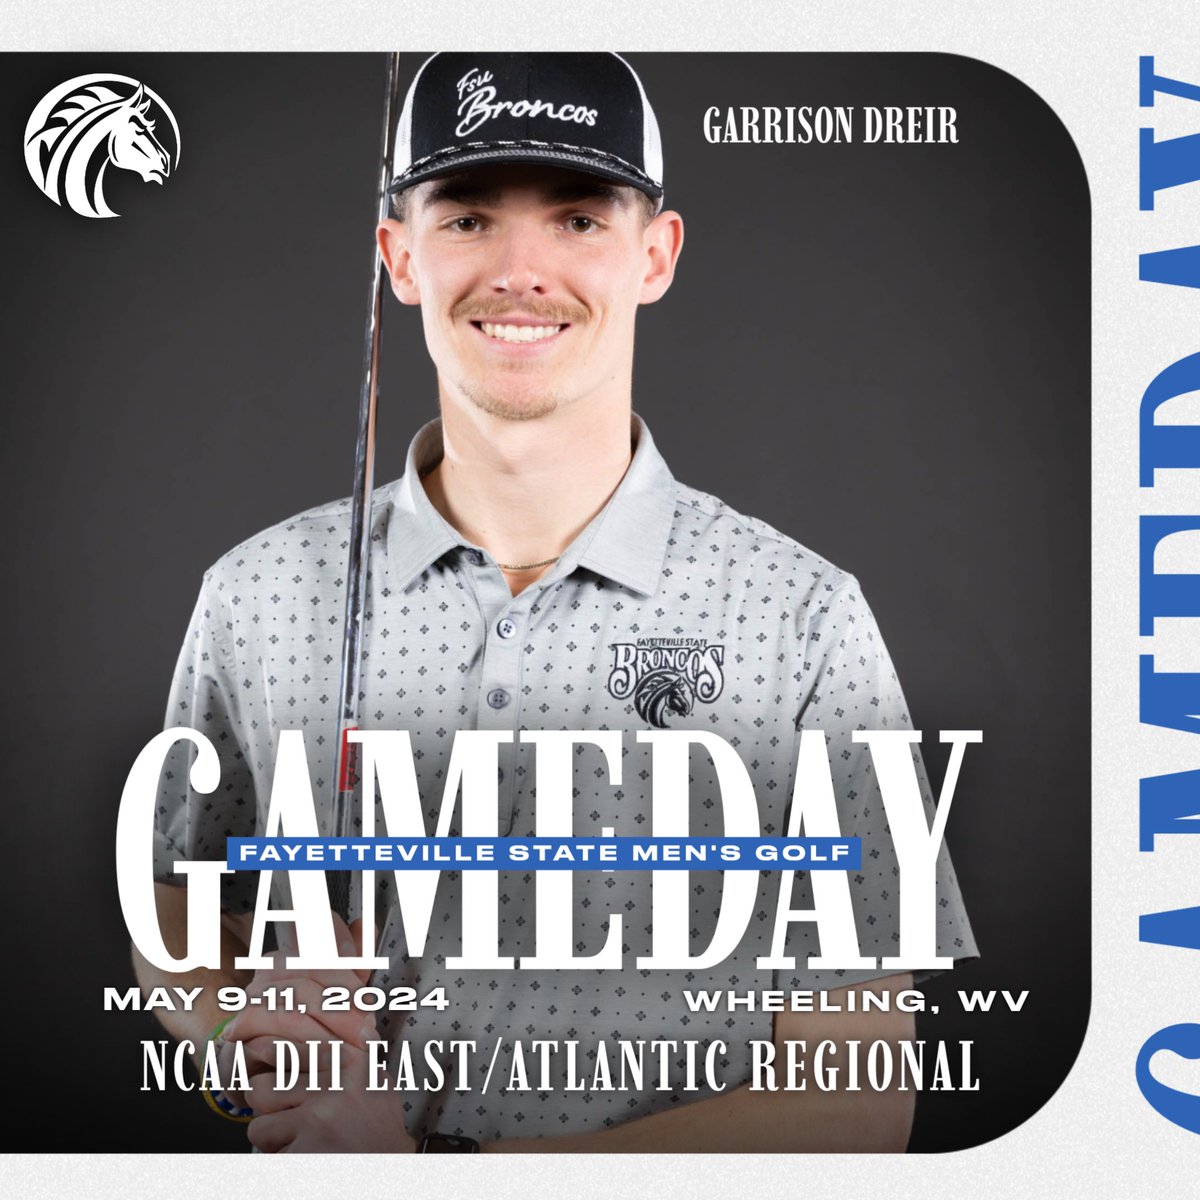 Our men's golf team continues to compete starting tomorrow at the NCAA DII East/Atlantic Regional! ⛳🐴 Keep up with live stats on fsubroncos.com. #attitudecheck #broncopride